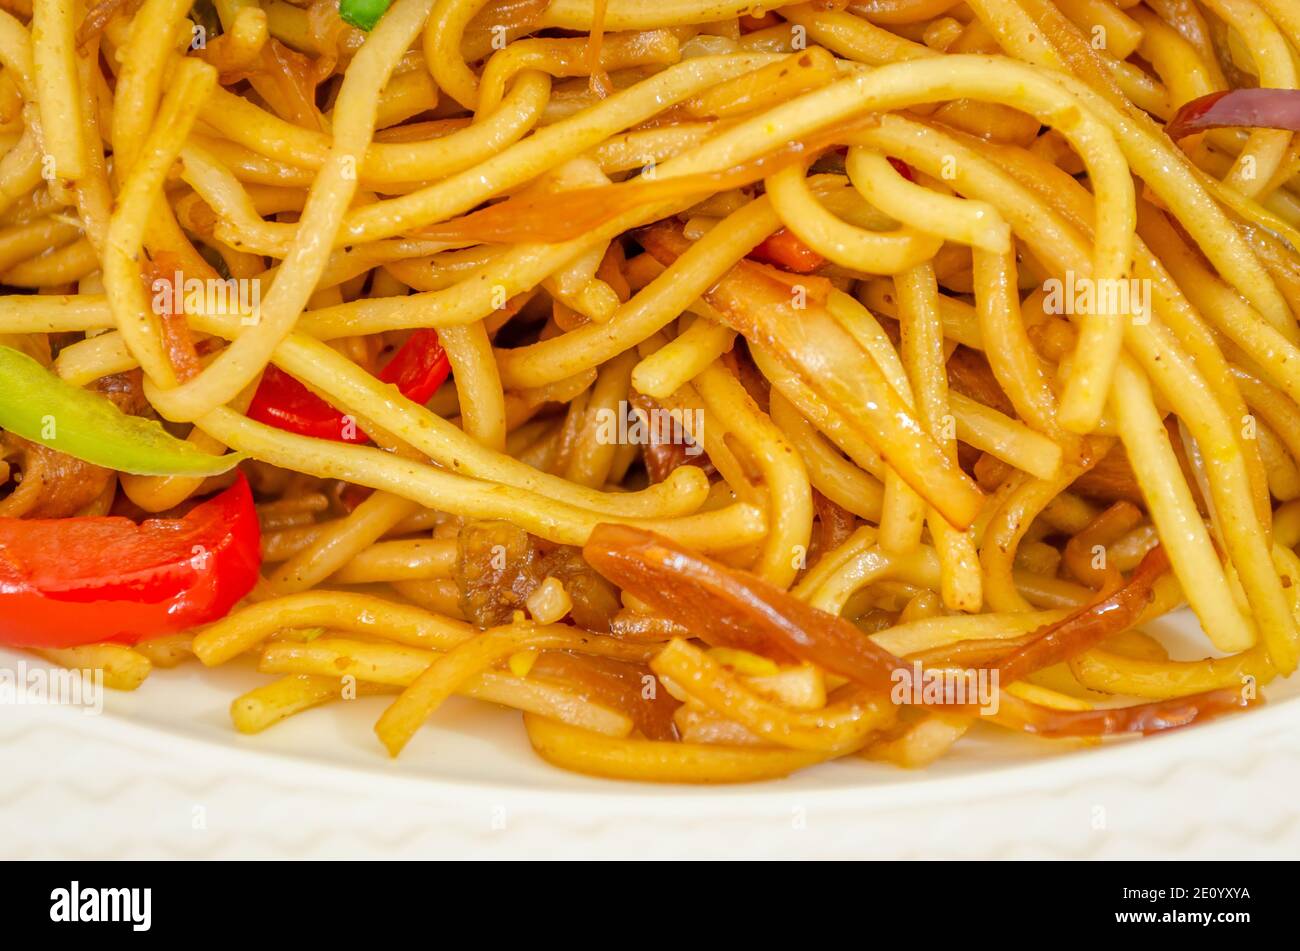 Closeup of Chicken Hakka Noodles in a white plate with added tomatoes and other vegetables Stock Photo